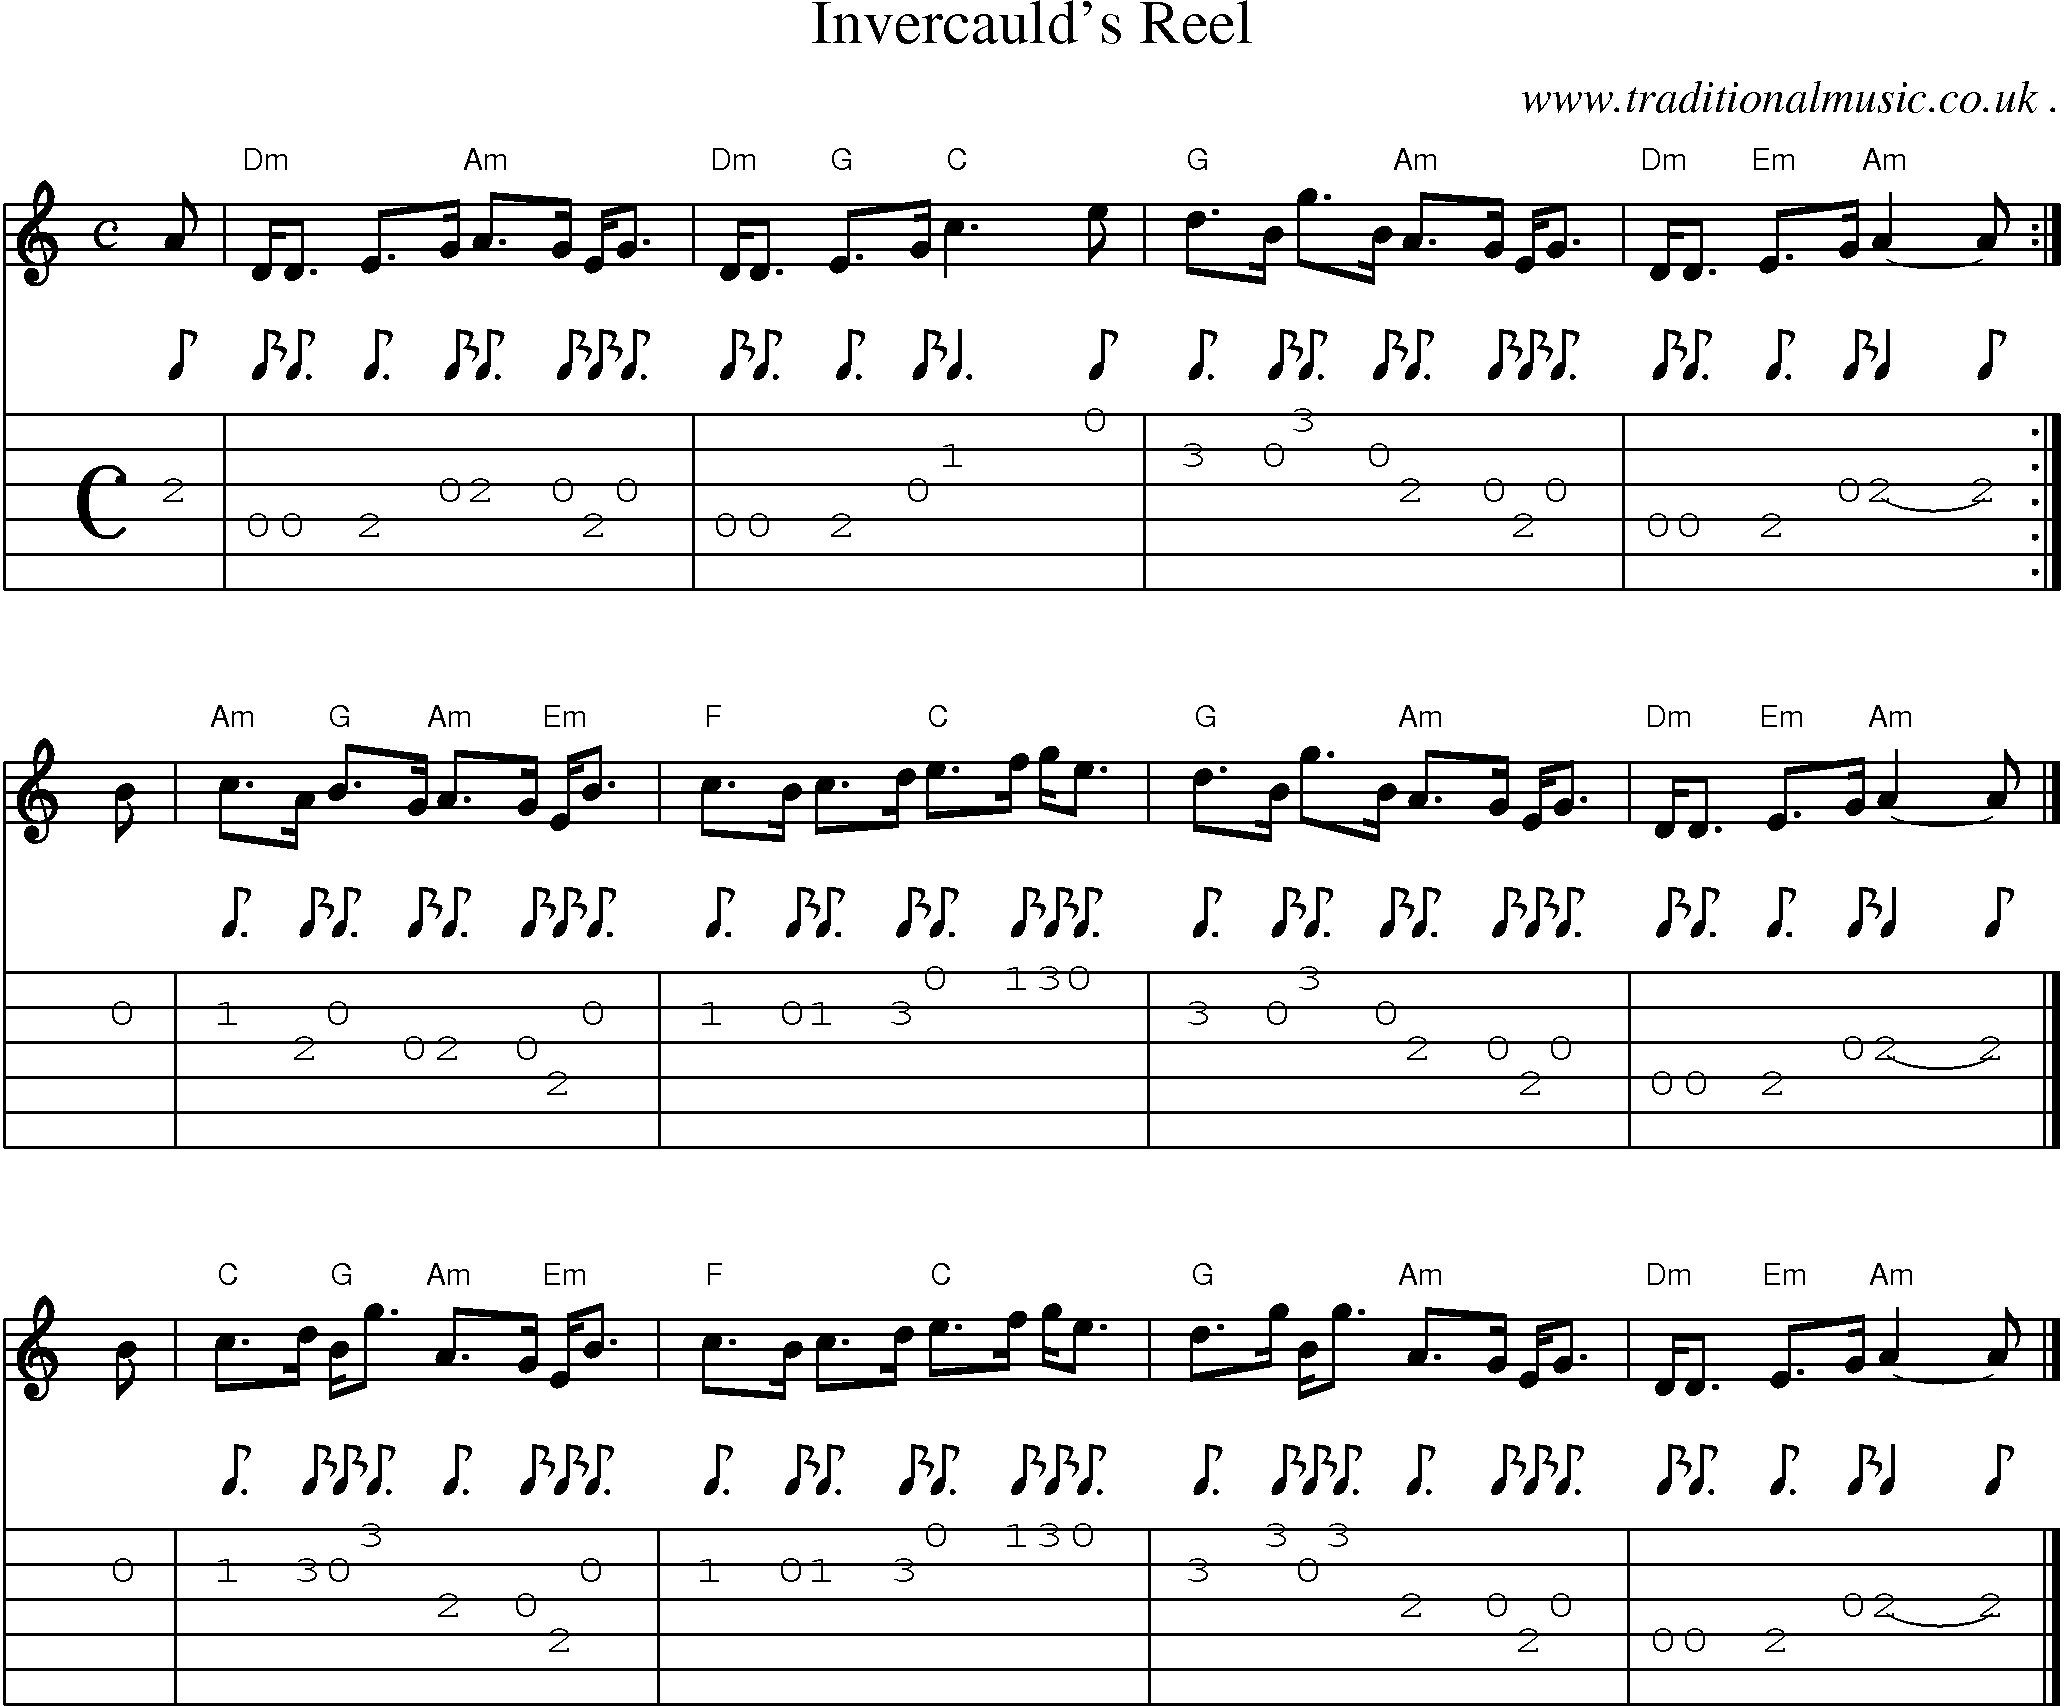 Sheet-music  score, Chords and Guitar Tabs for Invercaulds Reel